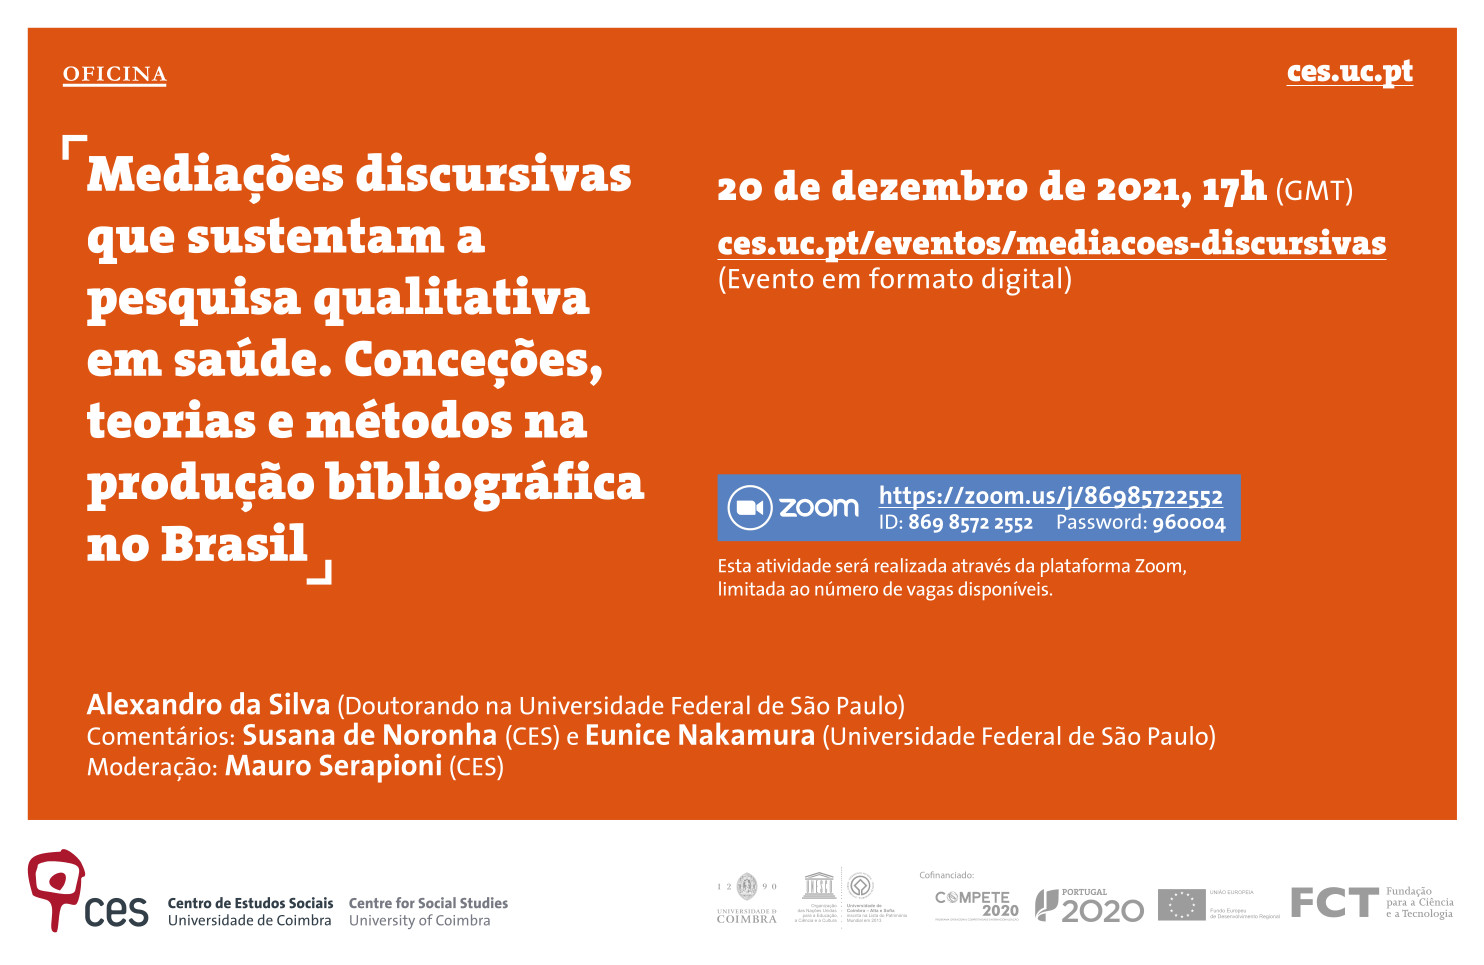 Discursive mediations that sustain qualitative research in health. Conceptions, theories and methods in bibliographic production in Brazil. <span id="edit_36344"><script>$(function() { $('#edit_36344').load( "/myces/user/editobj.php?tipo=evento&id=36344" ); });</script></span>